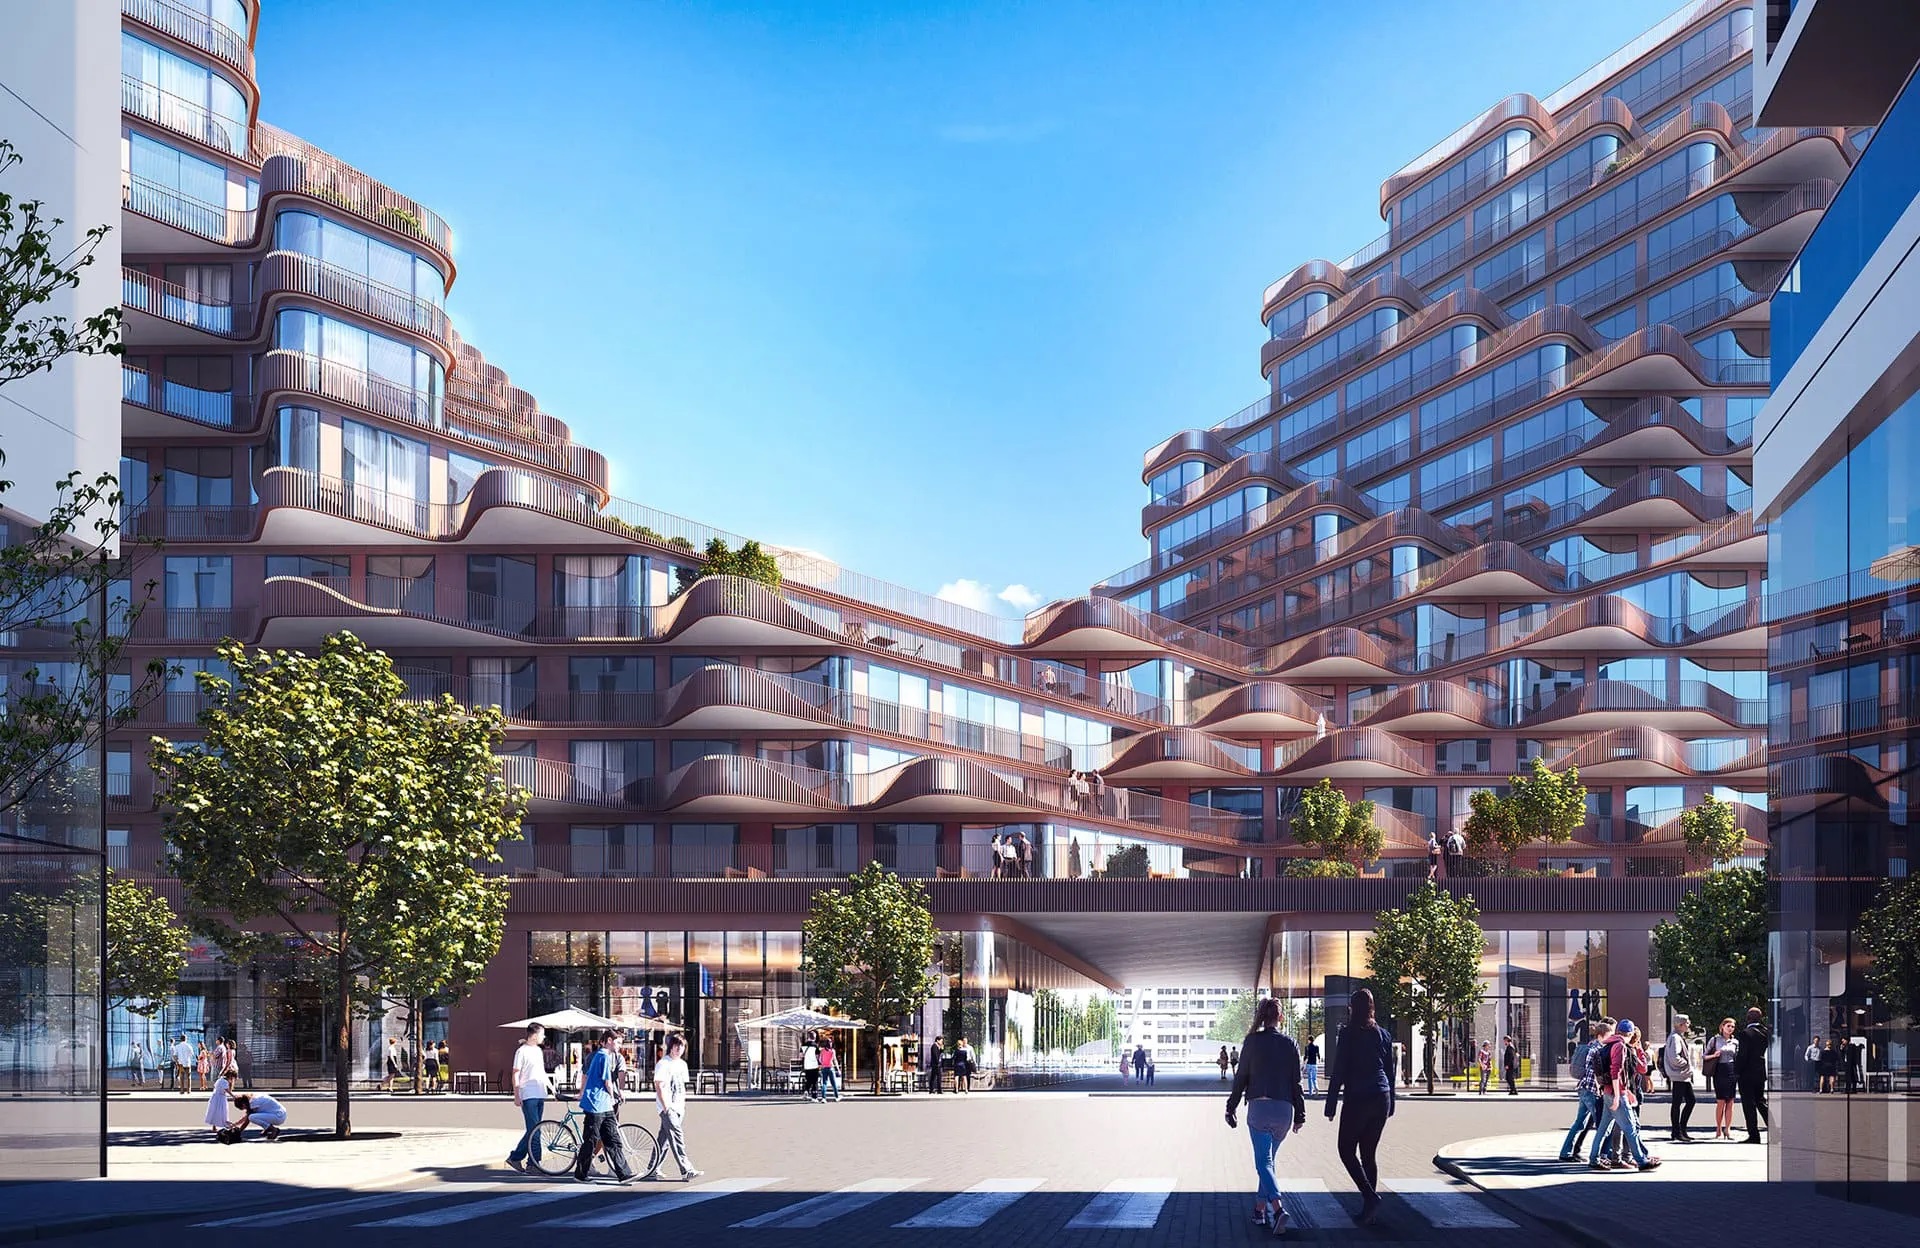 Aqualuna at Bayside Toronto is a new beacon of luxury waterfront living